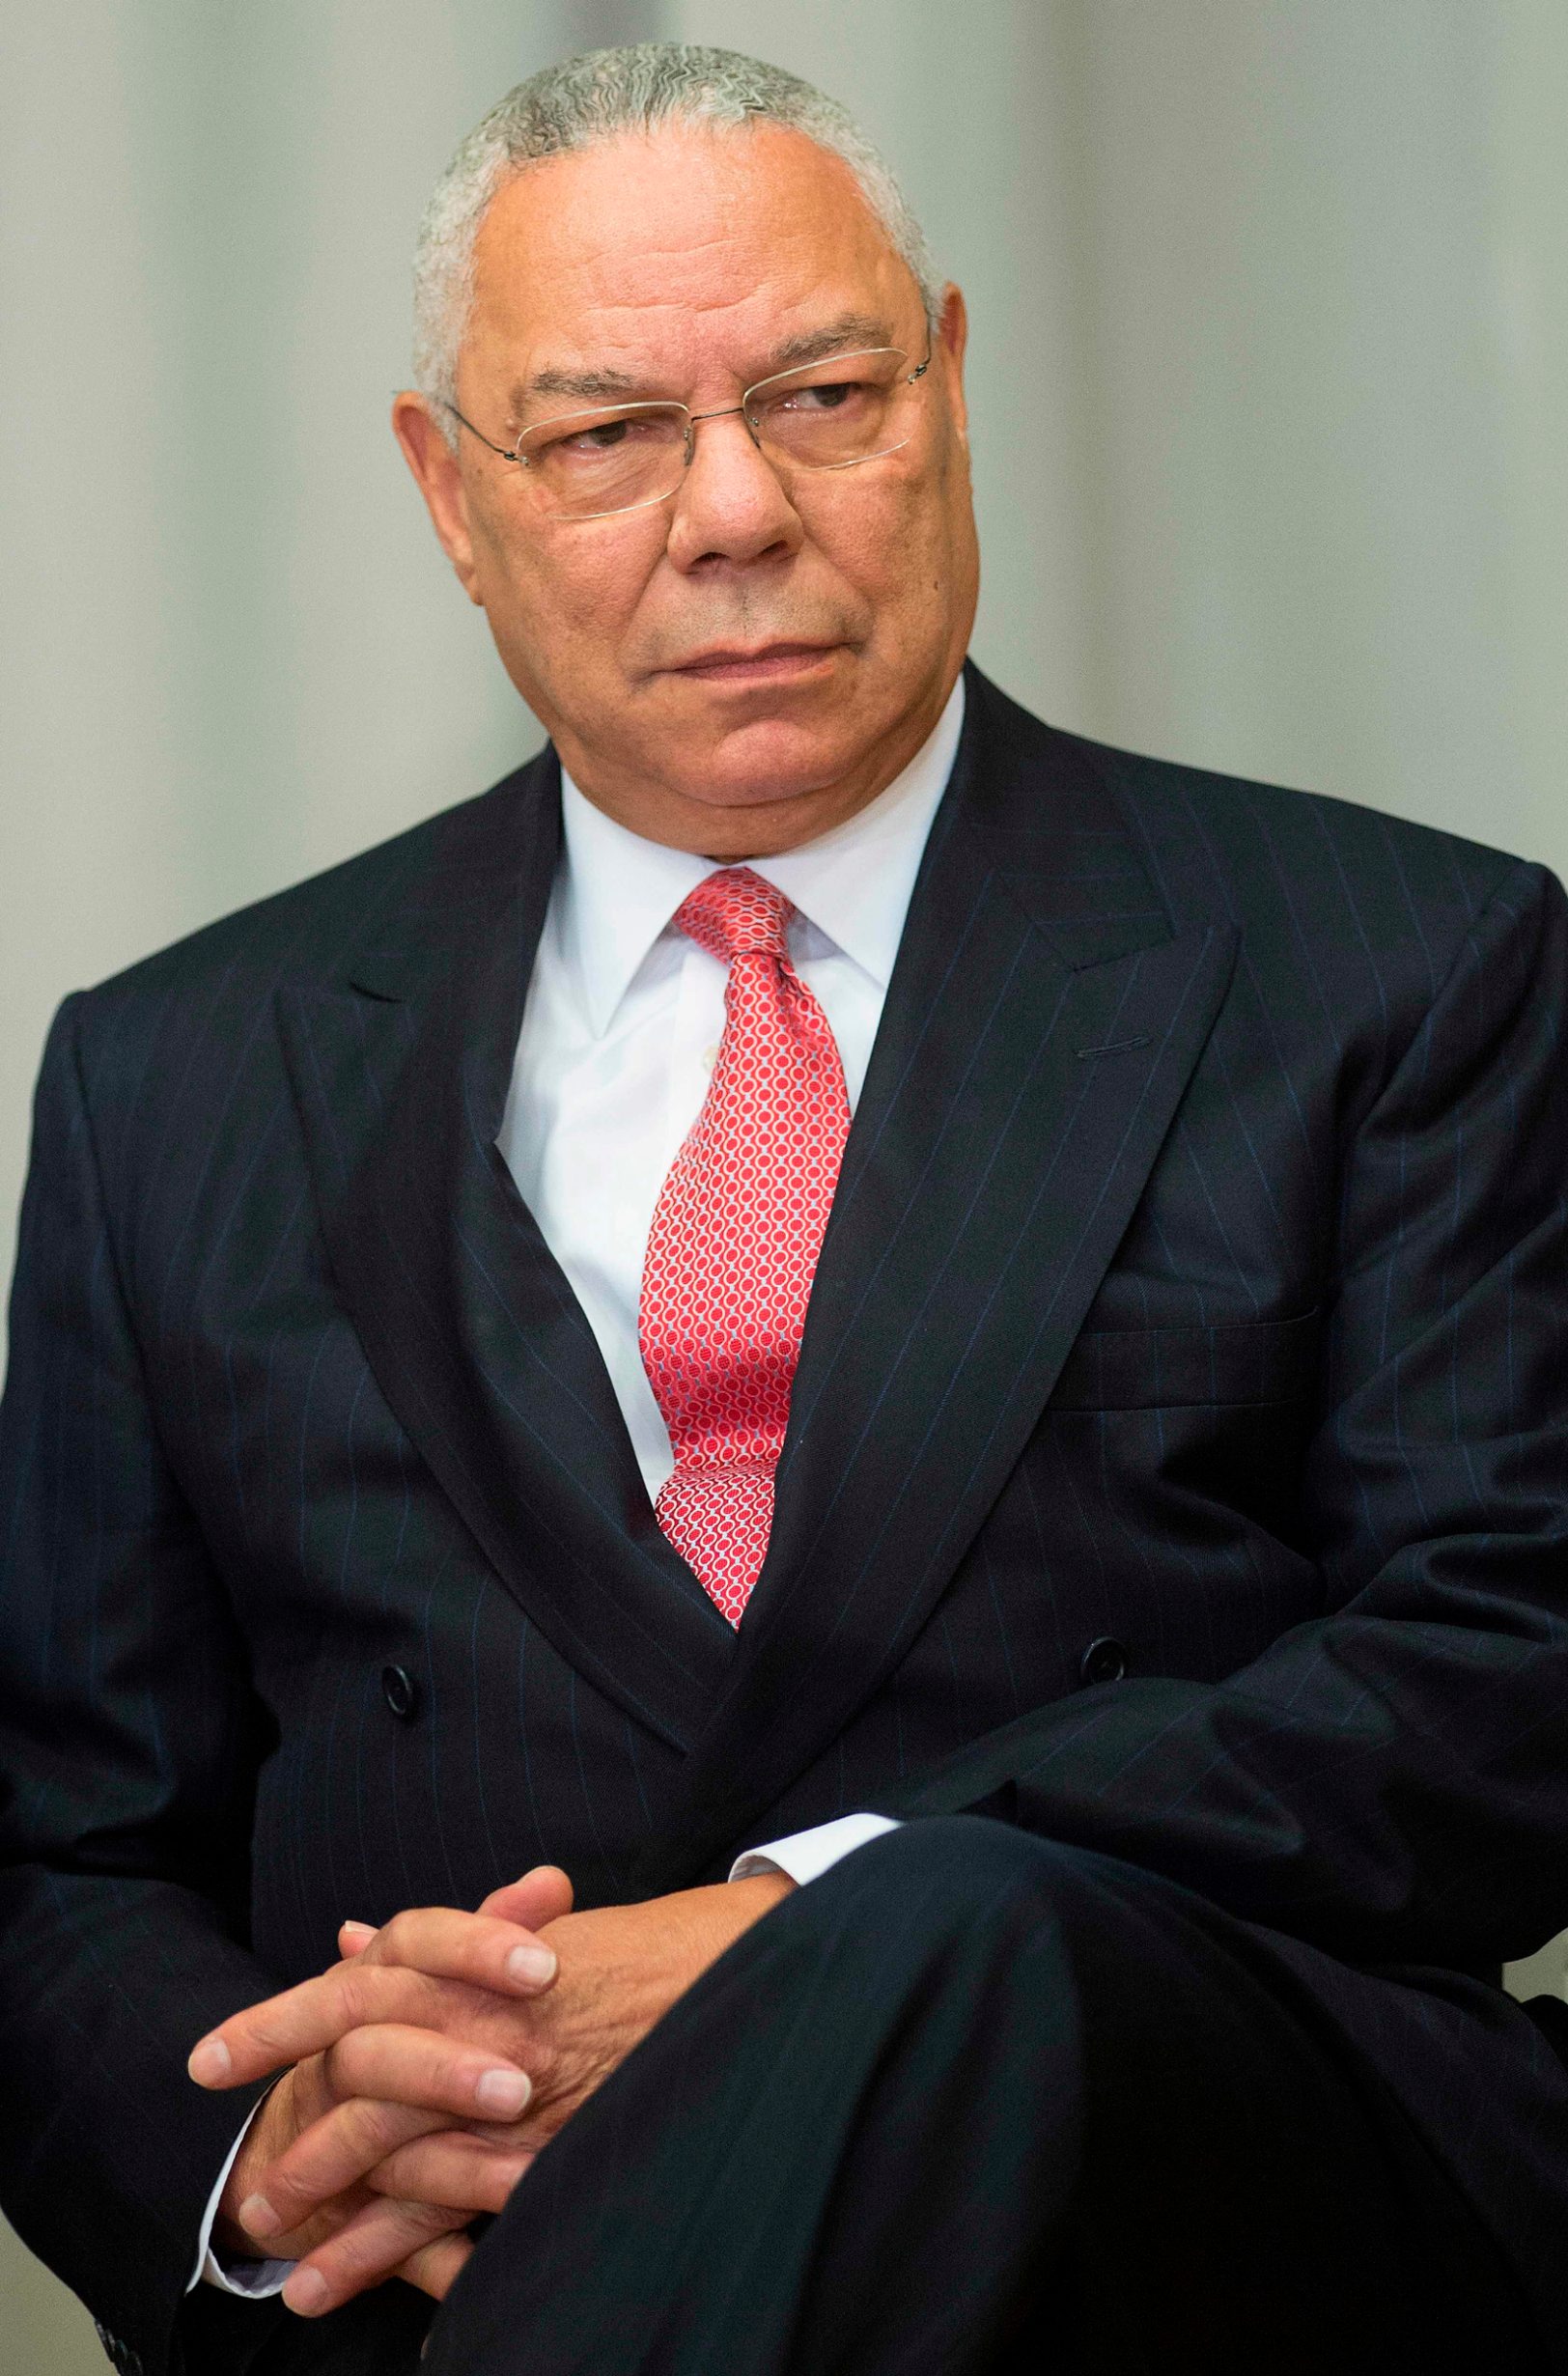 (FILES) In this file photo former US Secretary of State Colin Powell listens during a ceremony to break ground on the US Diplomacy Center at the US State Department in Washington, DC, September 3, 2014. - Colin Powell, who served as America's top military officer and top diplomat under Republican presidents, said June 7, 2020 he will vote for Democrat Joe Biden, accusing Donald Trump of drifting from the US constitution. In a scathing indictment of Trump on CNN, Powell denounced the US president as a danger to democracy whose lies and insults have diminished America in the eyes of the world. (Photo by Jim WATSON / AFP)